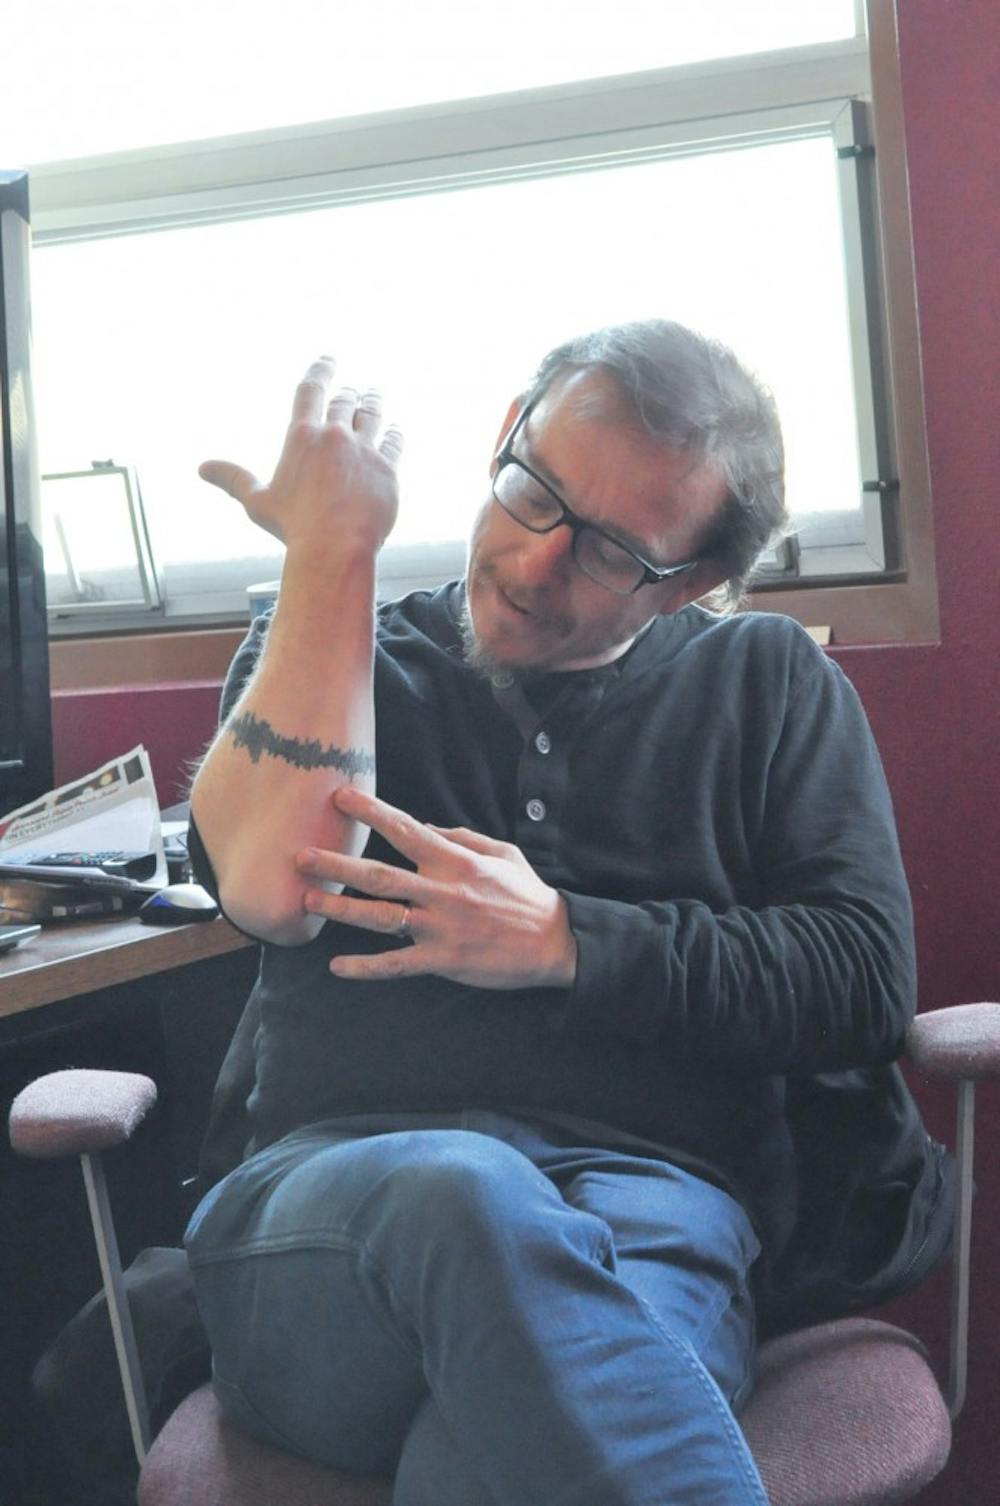 UNM Professor Lee Montgomery shows off his tattoo of a soundbite during an interview on Jan. 27.
